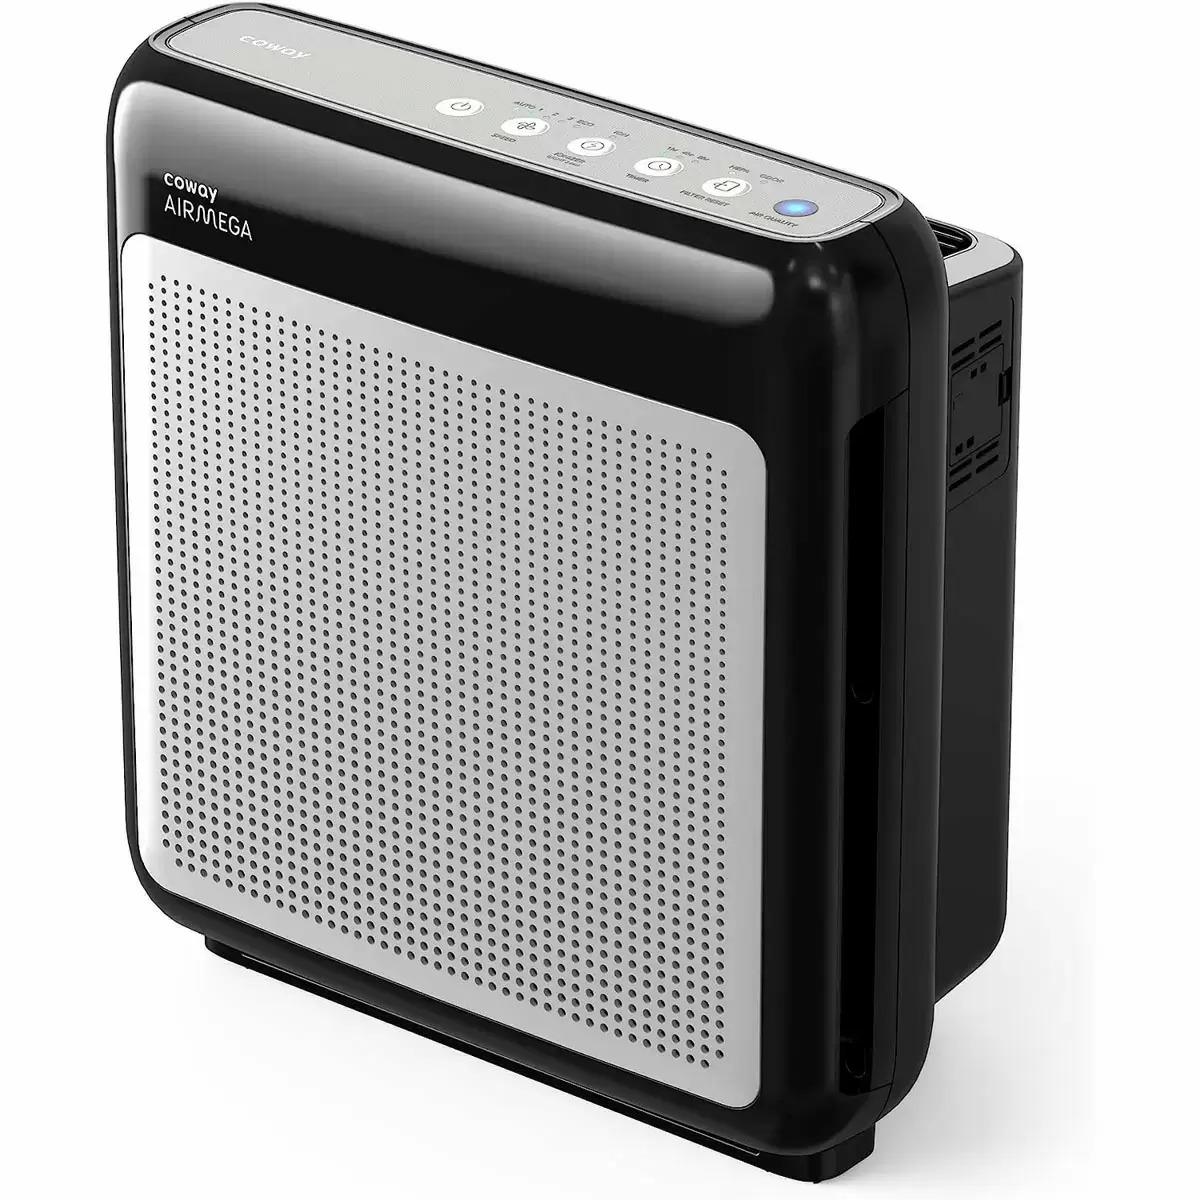 Coway Airmega 200M Air Purifier with True HEPA and Smart Mode for $128 Shipped